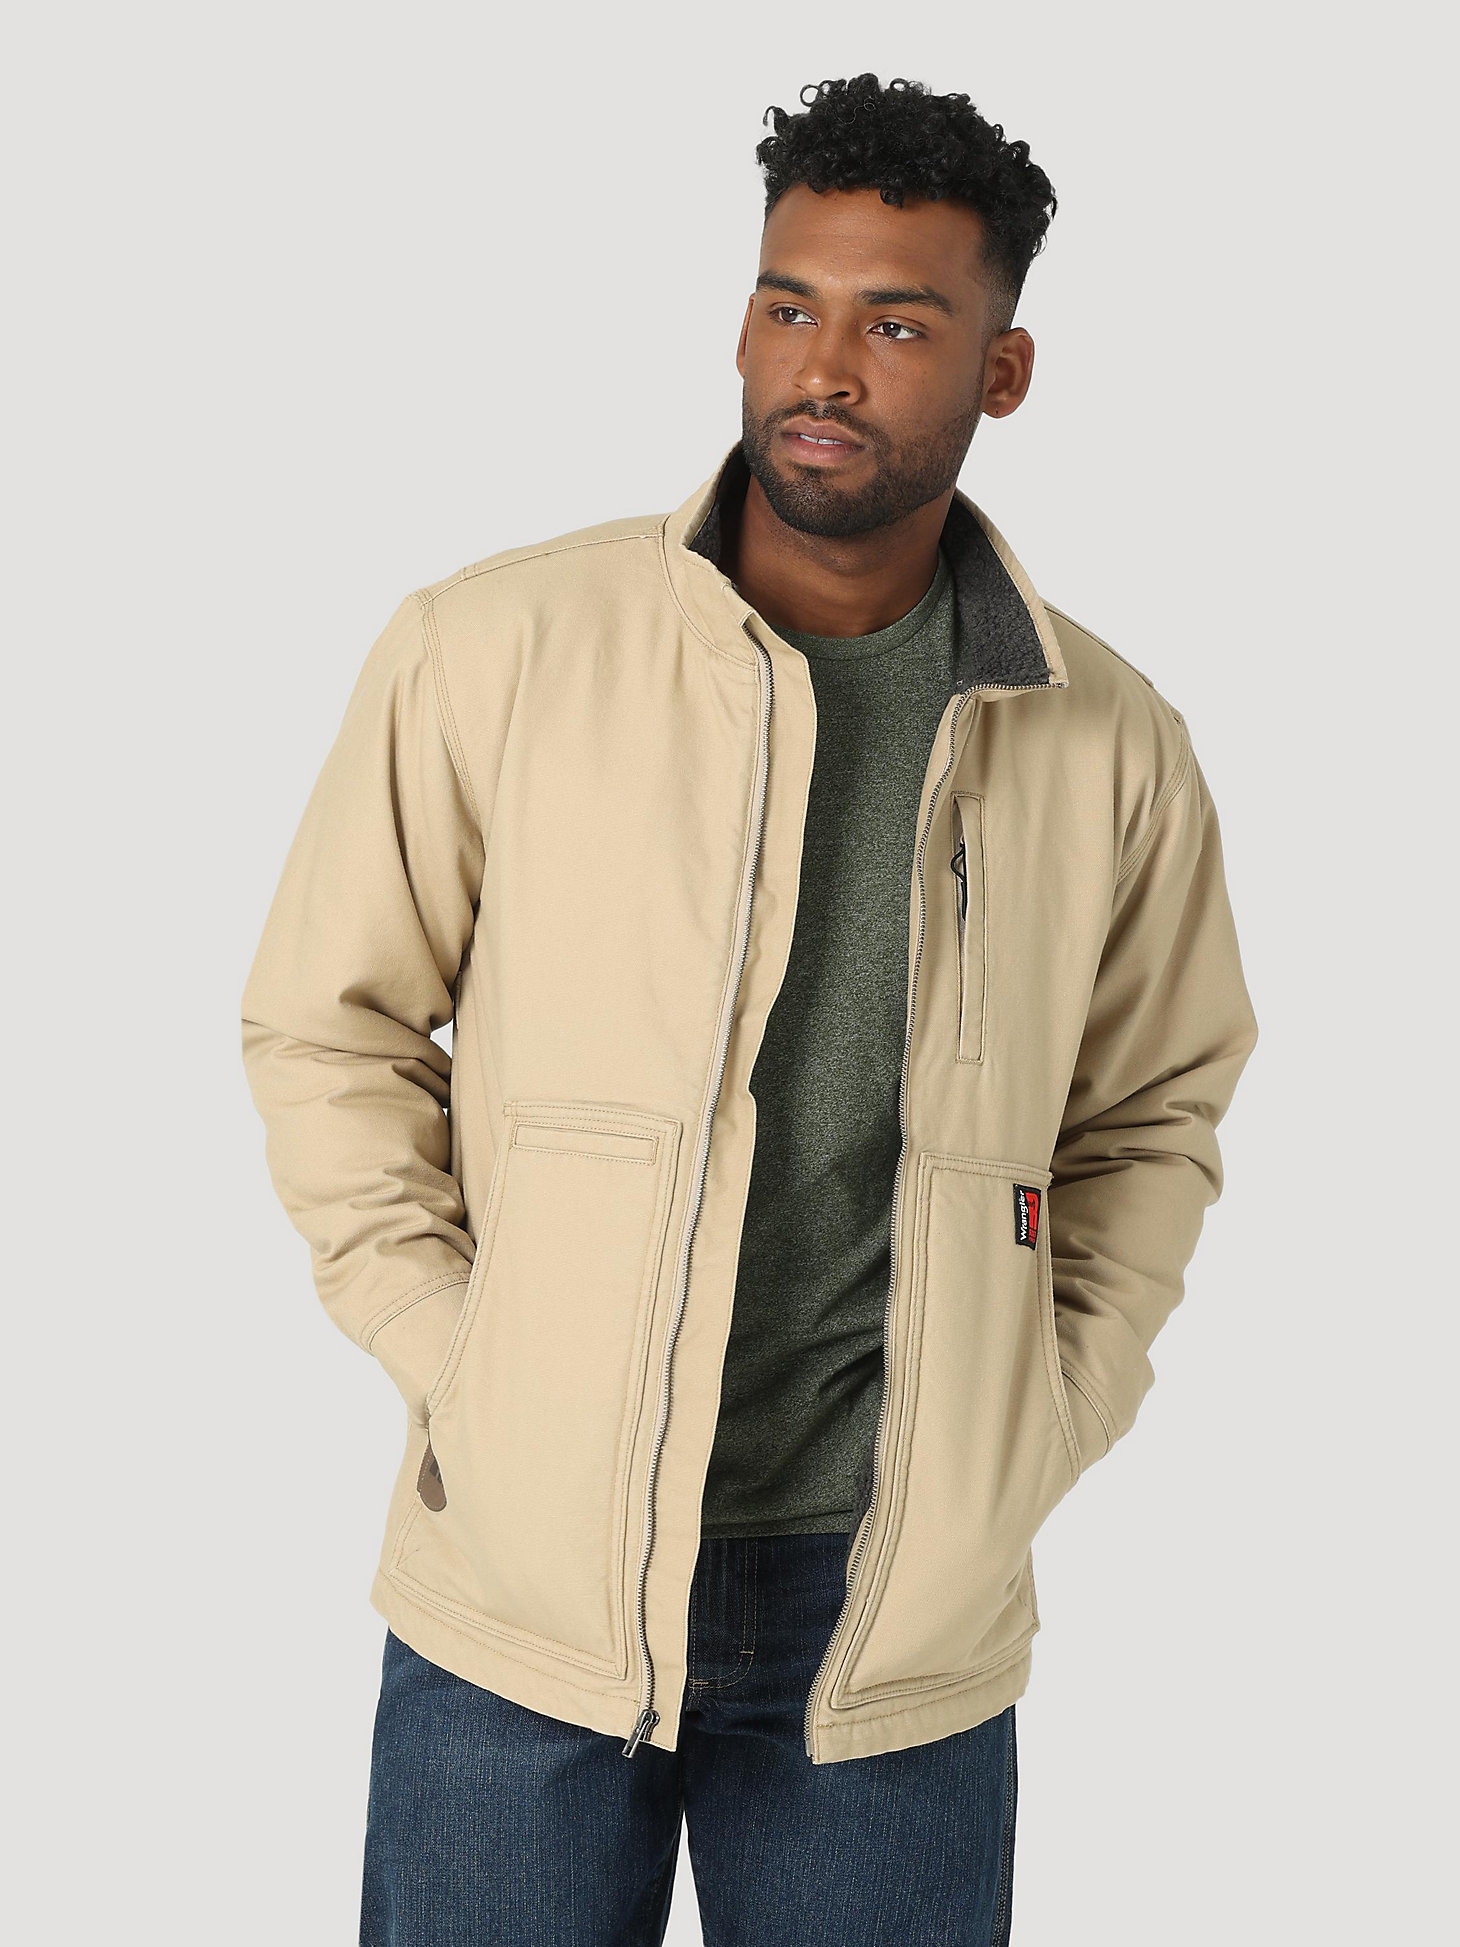 Wrangler® RIGGS Workwear® Tough Layers Sherpa Lined Canvas Jacket